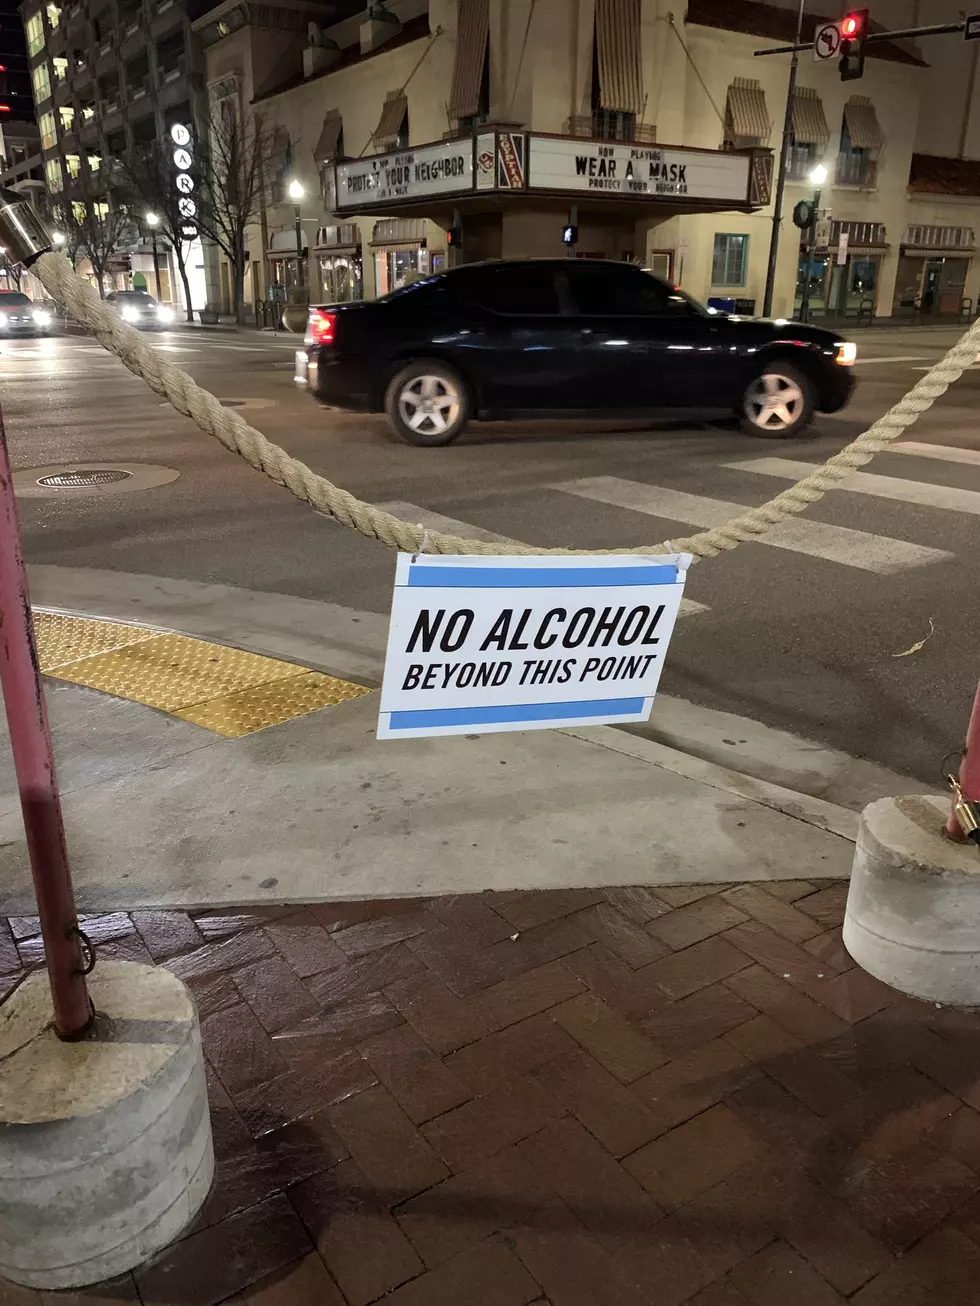 Opinion: Boise Should Allow Alcohol &#8220;Beyond This Point&#8221;